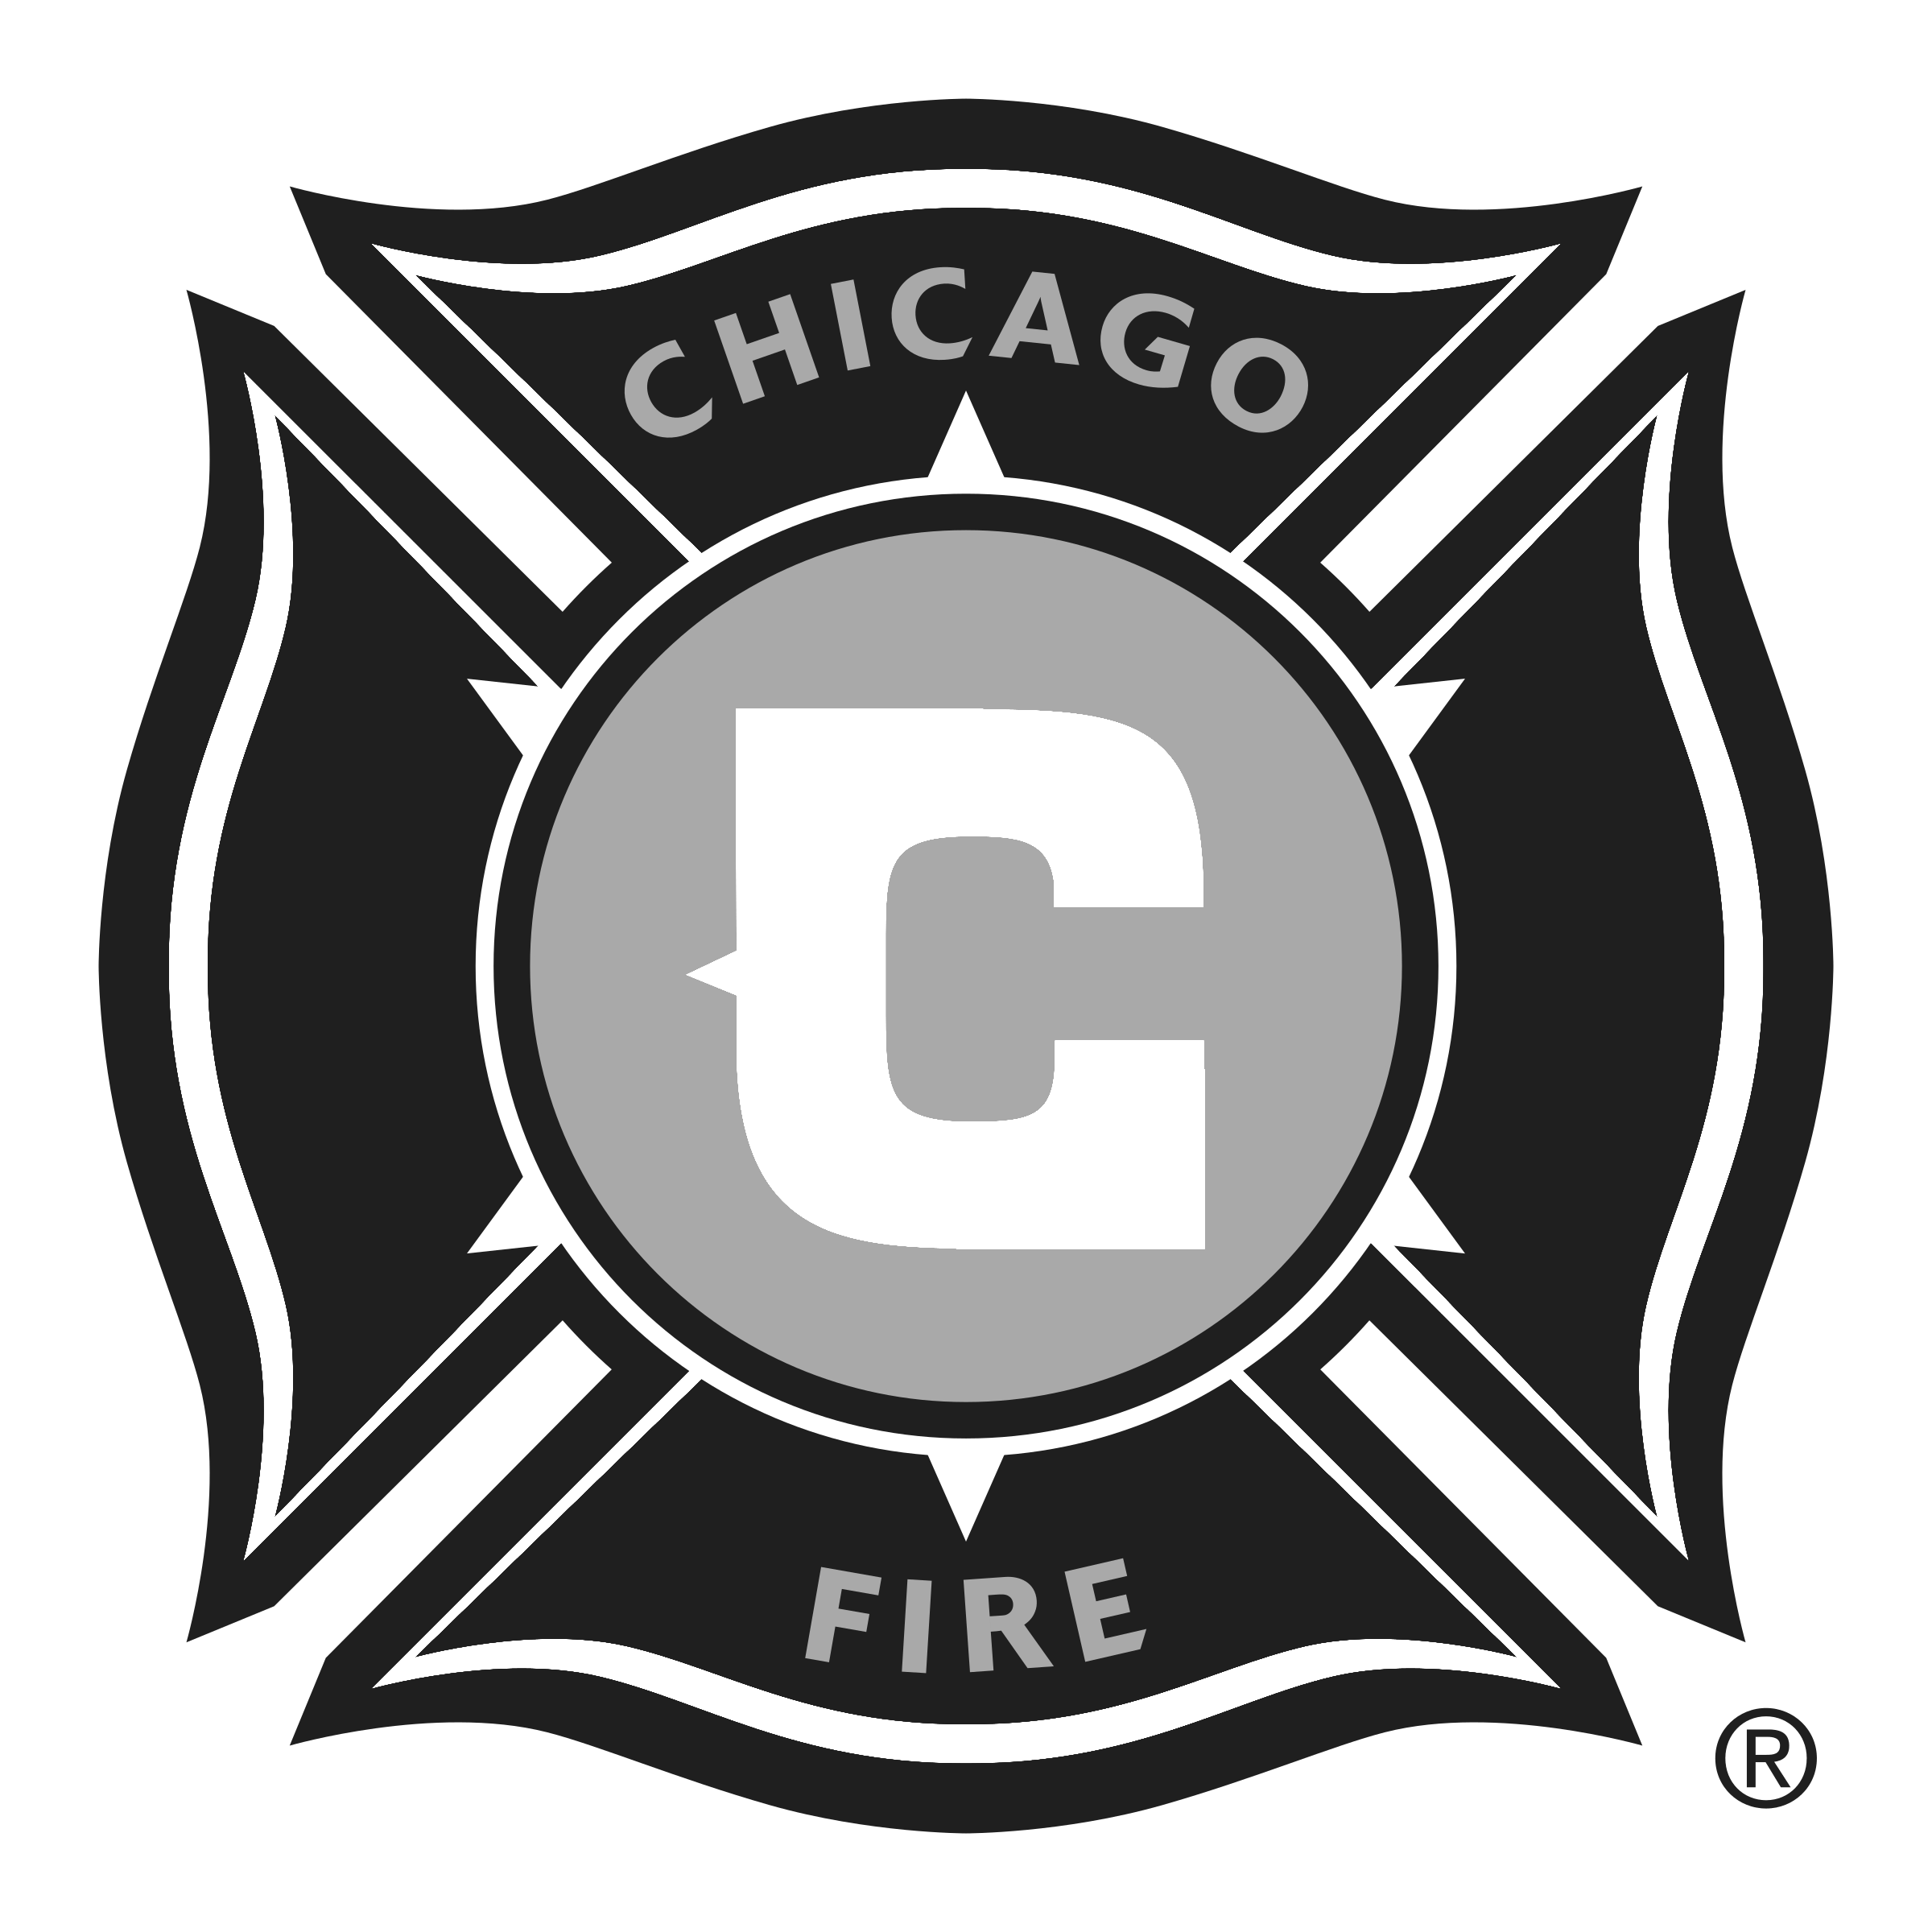 Black and White Soccer Club Logo - Chicago Fire Soccer Club Logo PNG Transparent & SVG Vector